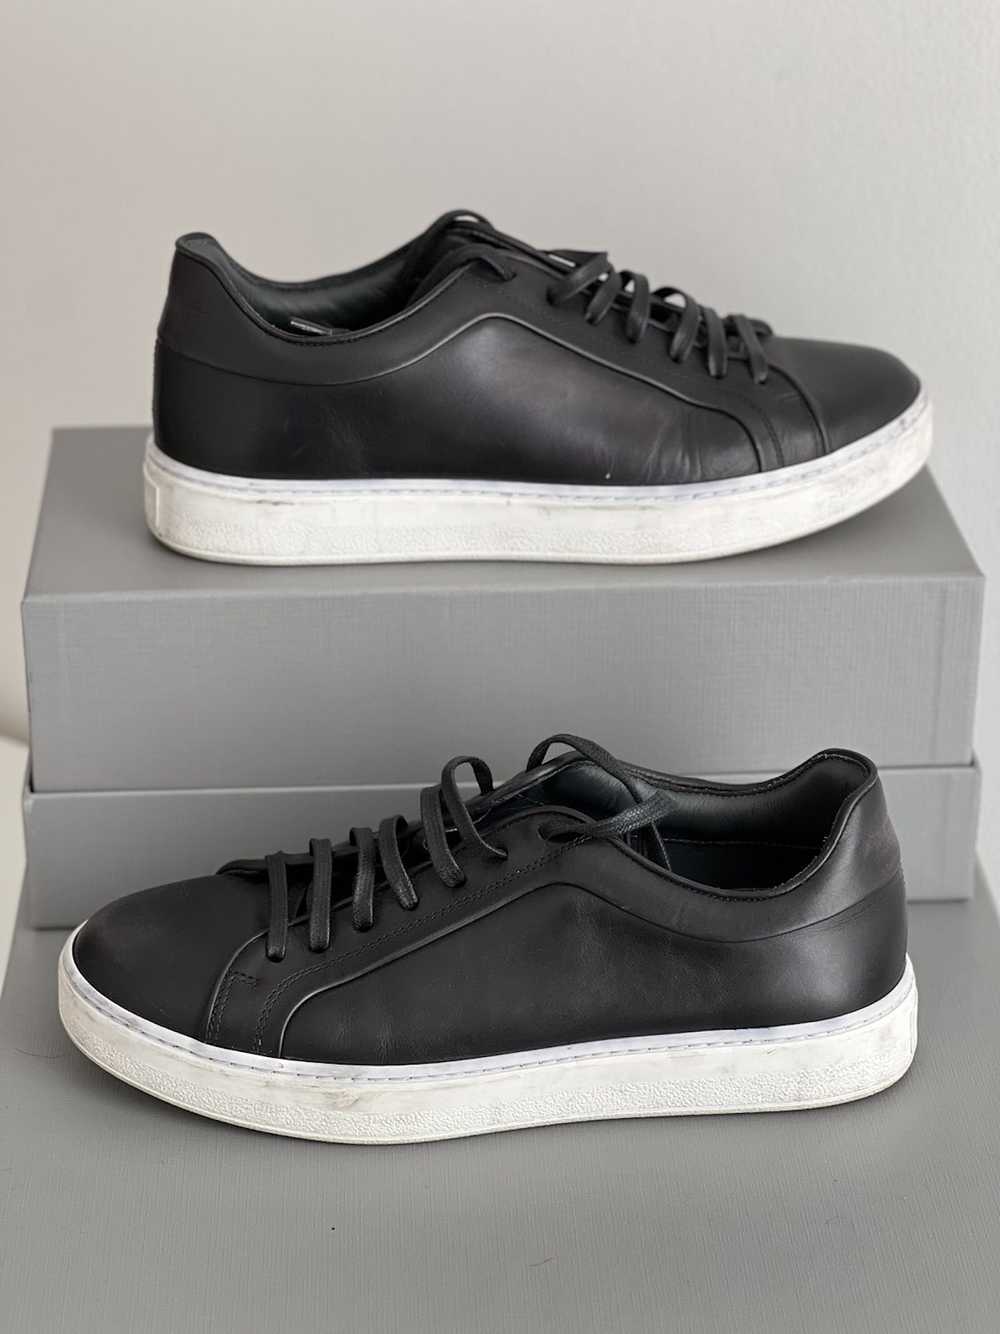 Dior Basic Dior Homme black & white sneakers - image 3